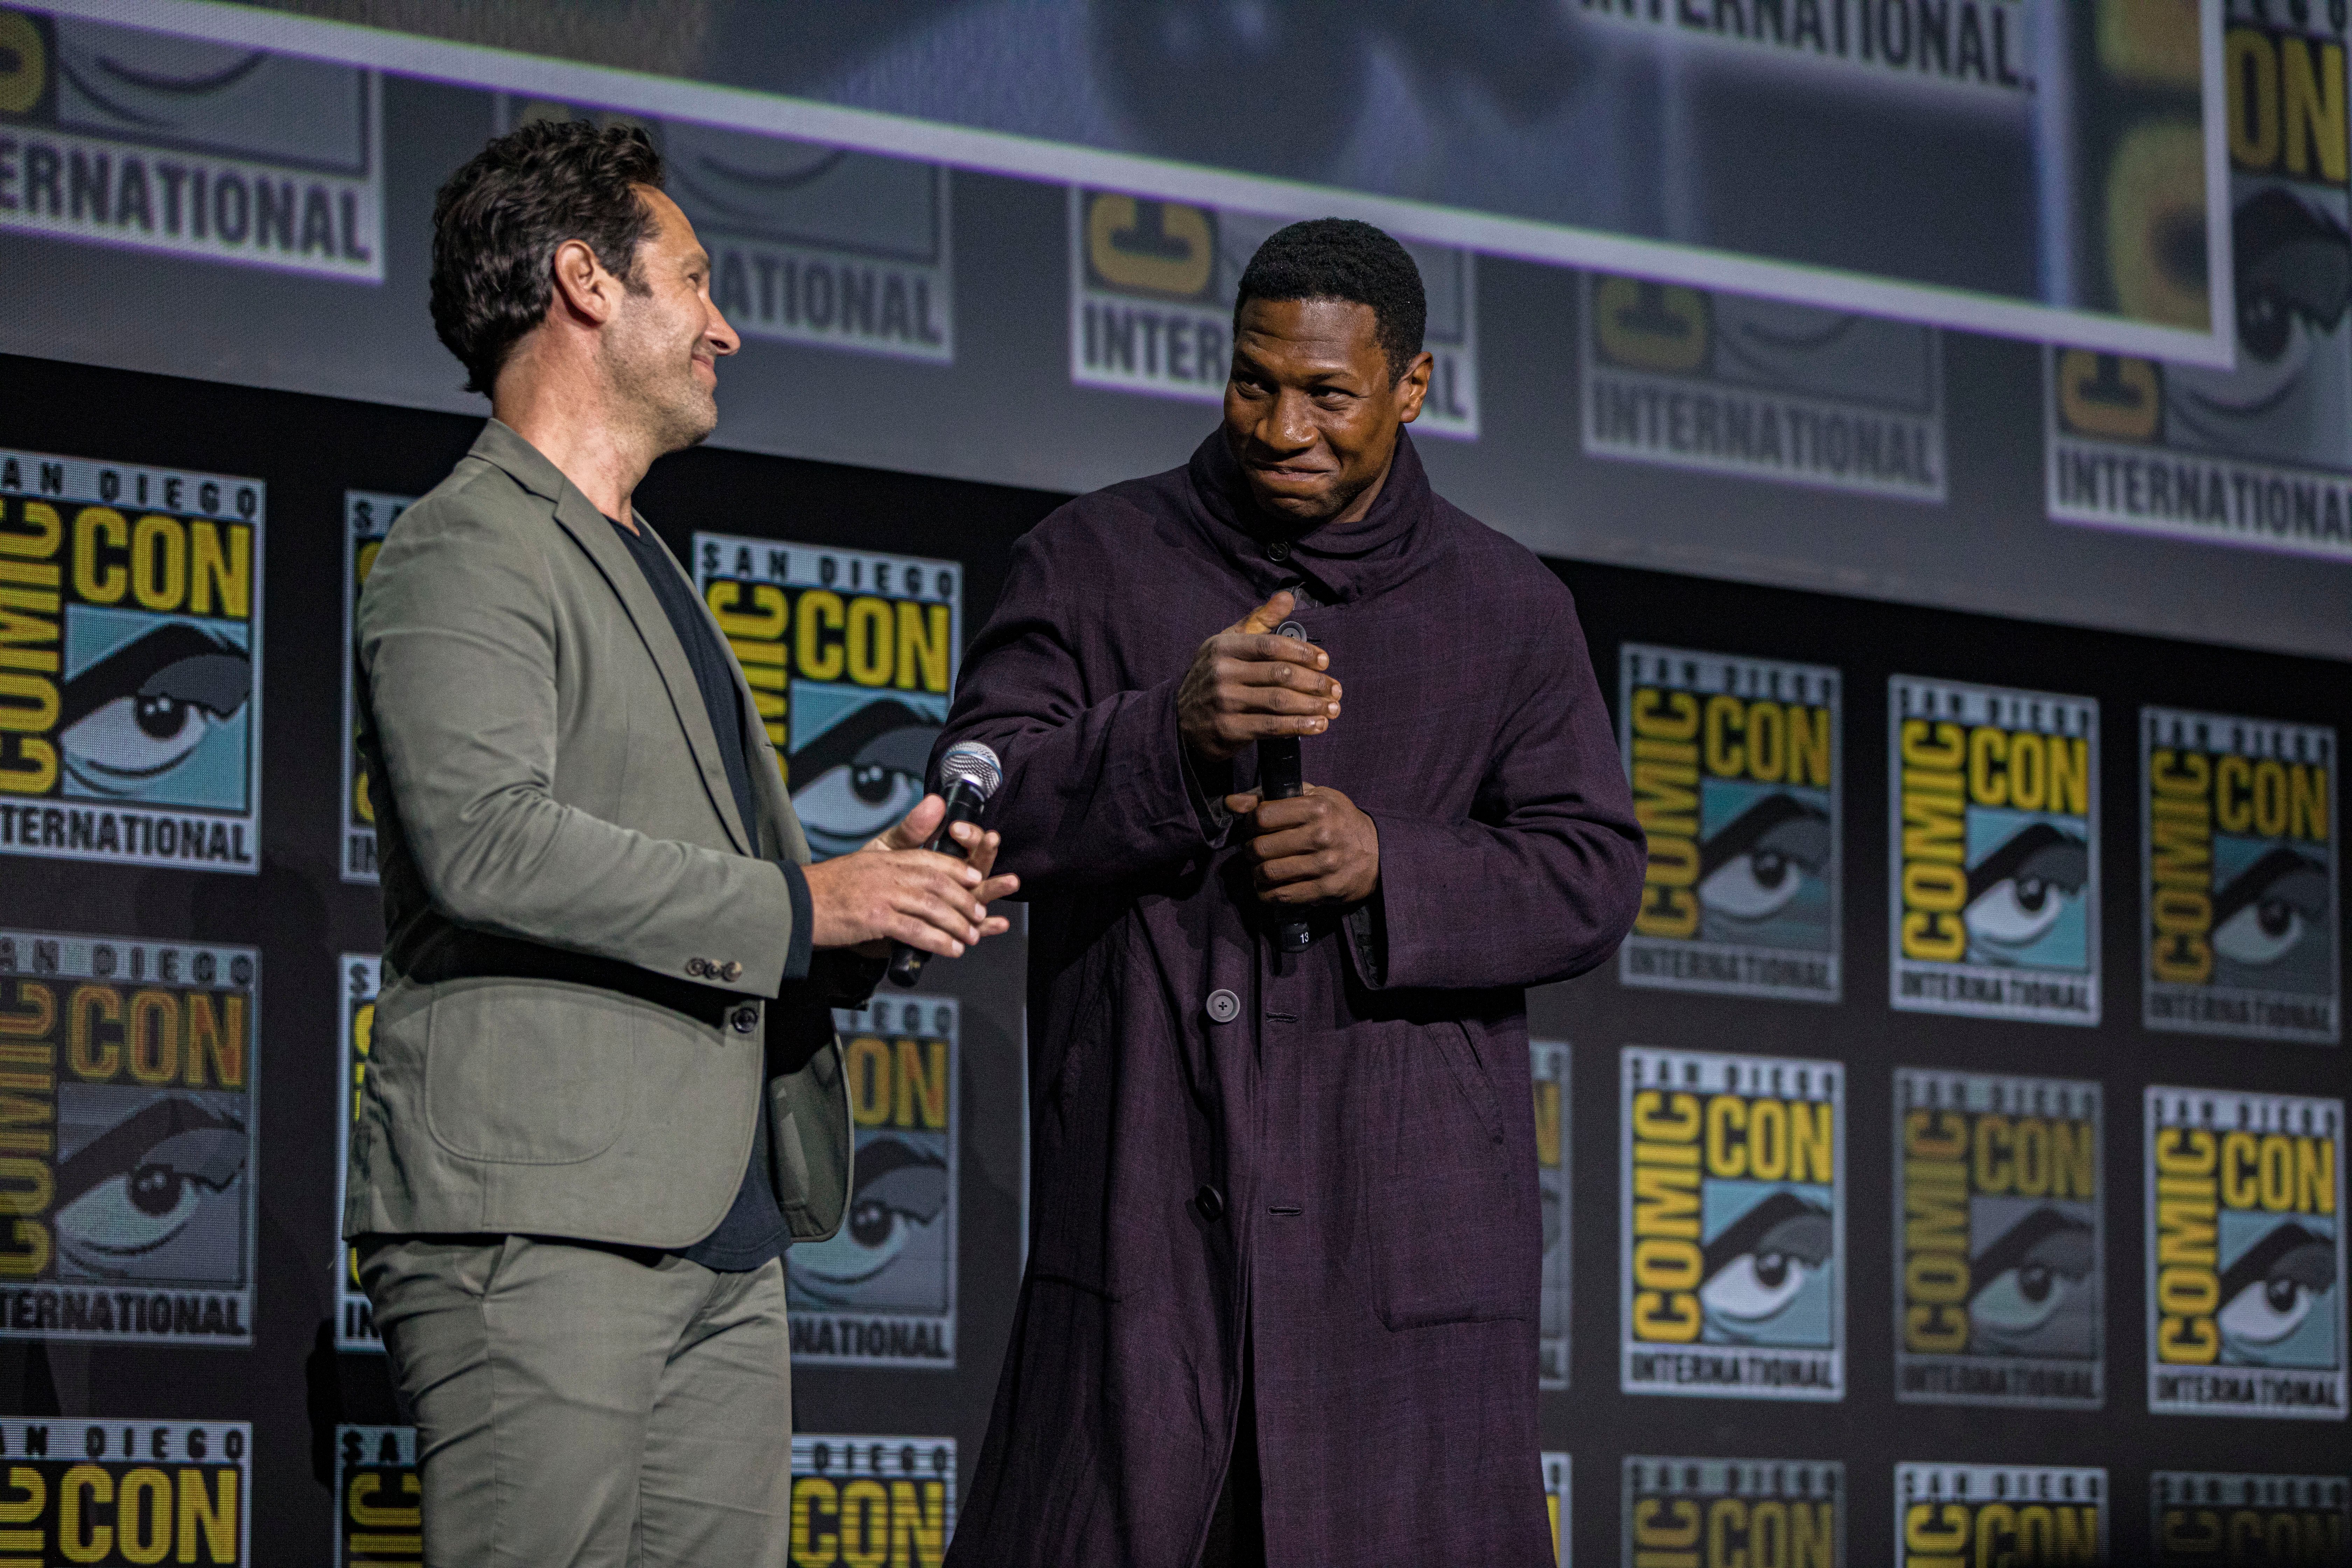 Paul Rudd and Jonathan Majors, who star as Scott Lang and Kang the Conqueror in the 'Ant-Man and the Wasp: Quantumania' trailer, speak onstage as Comic-Con. Rudd wears a light gray suit over a black shirt and light gray pants. Majors wears a long dark purple coat.